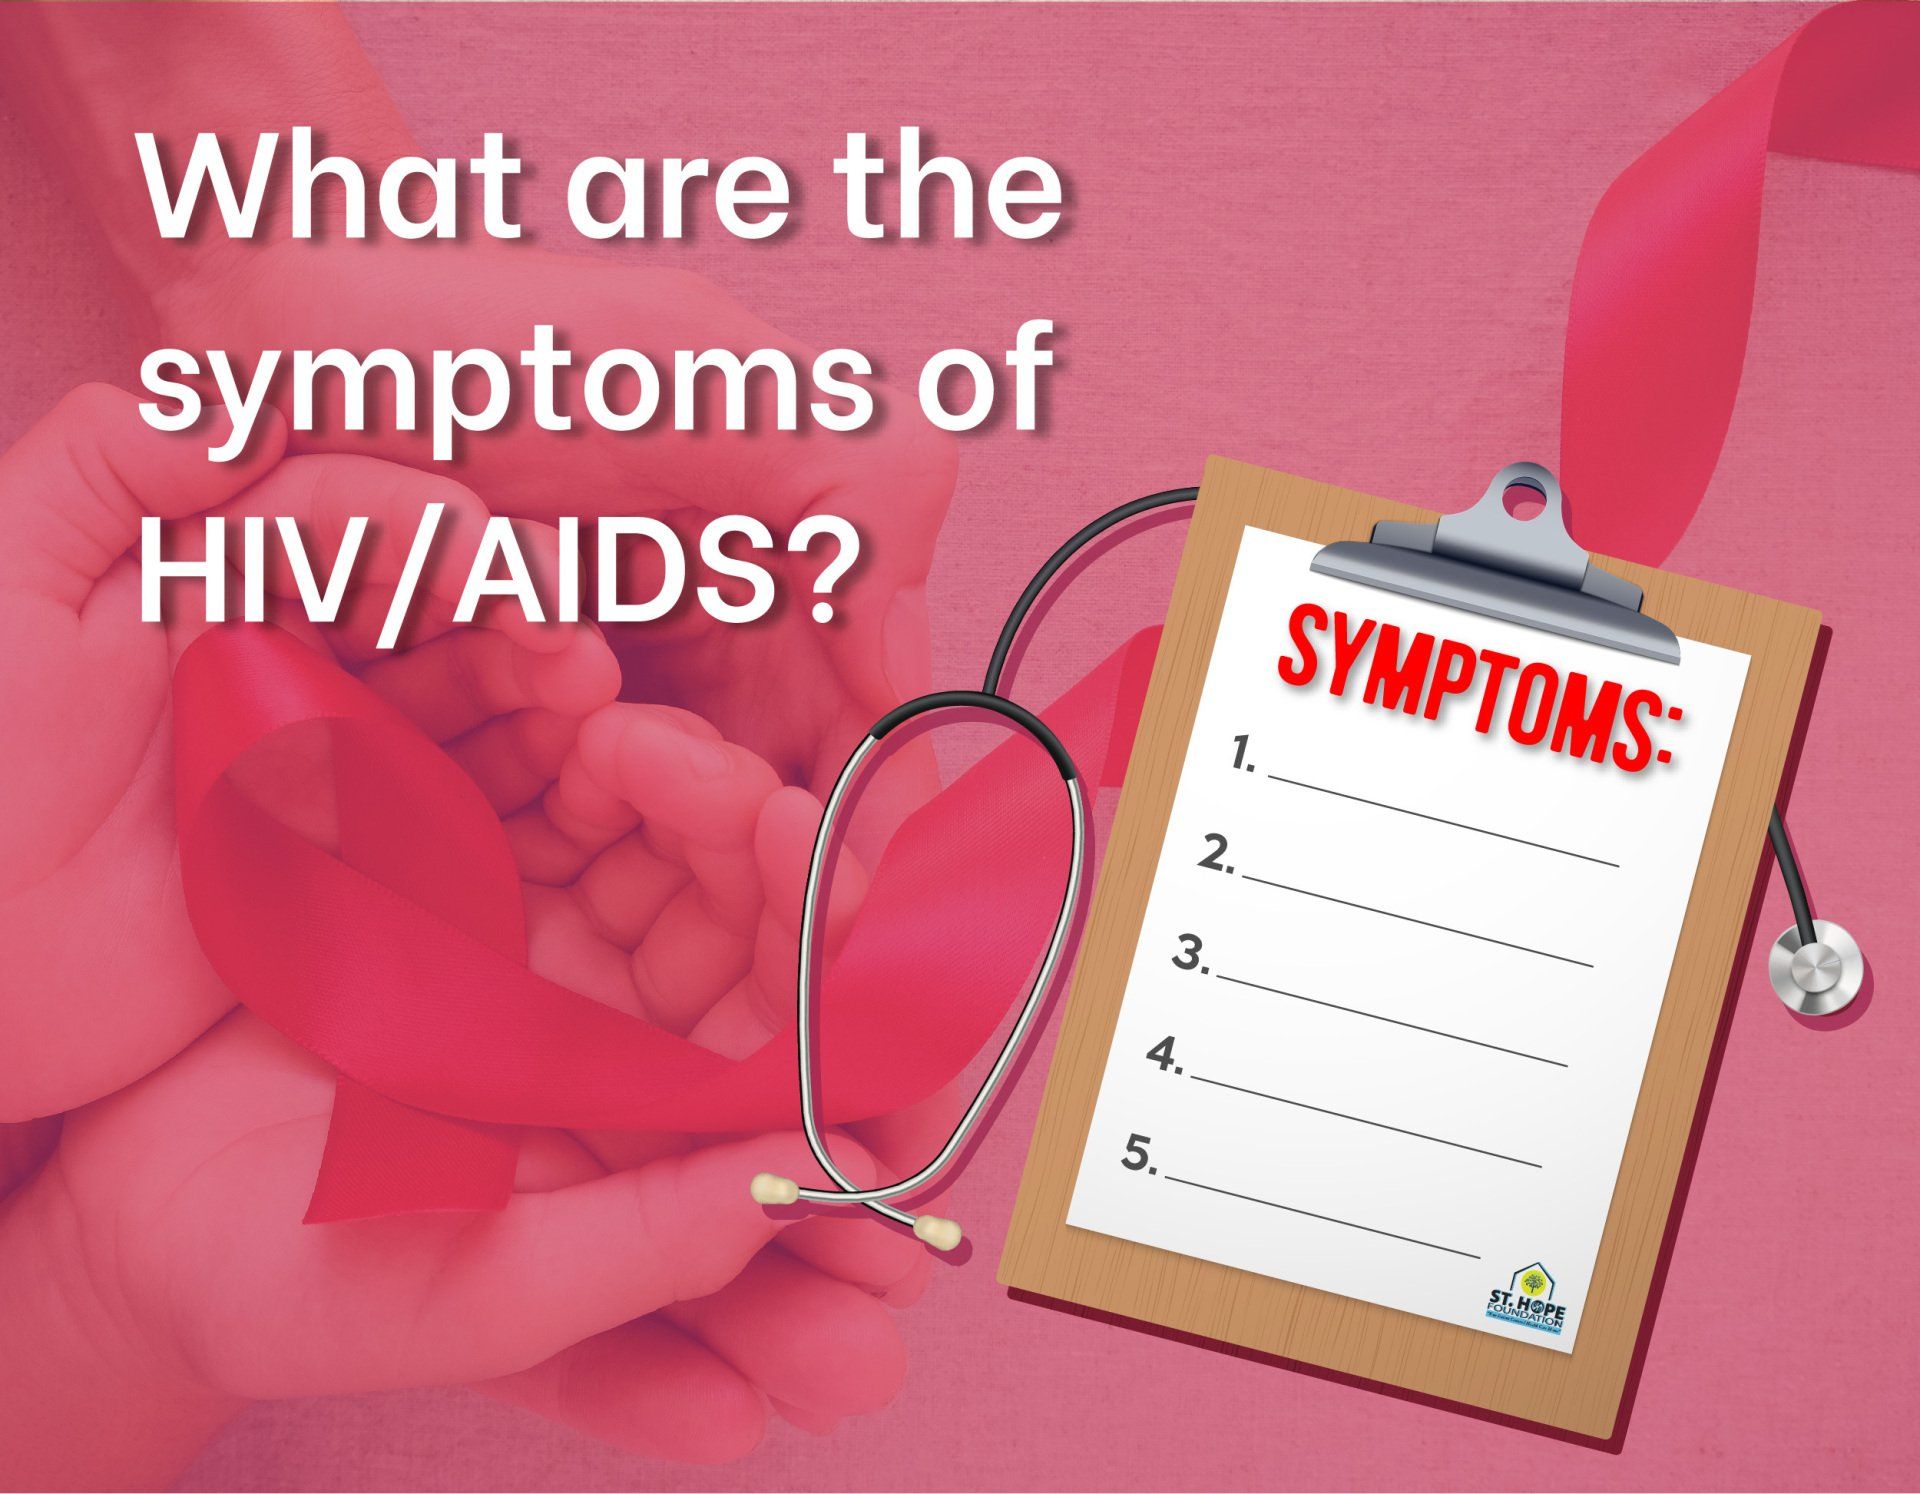 what are the symptoms of HIV/AIDS